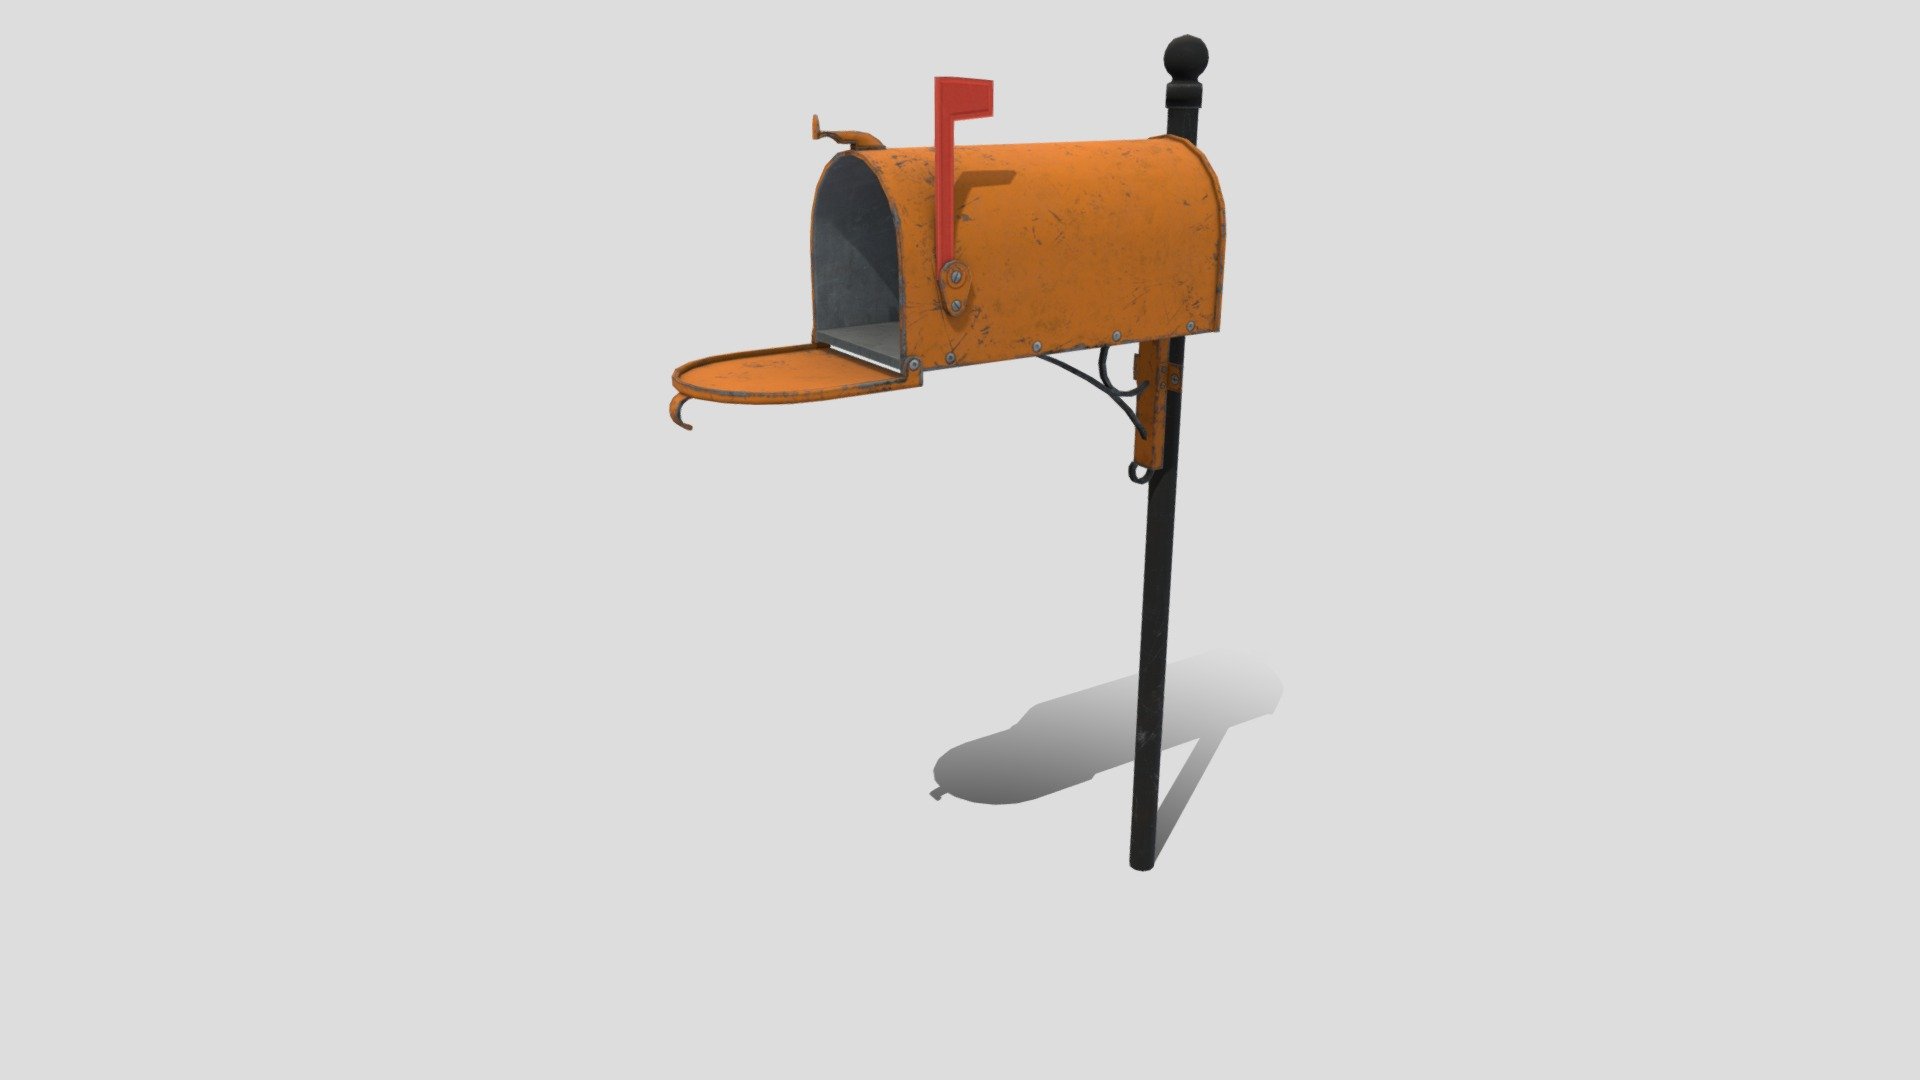 3D Mail Box. 


This package contains a mailbox. 
Just drag and drop prefab into your scene and achieve beautiful results in no time.


Can be used for video games and Urban projects&hellip;etc Available formats FBX, 3DS Max 2017.


We are here to empower the creators. Please contact us via the https://aaanimators.com/#contact-area if you are having issues with our assets. Our team will get back to you momentarily.


Mesh complexities:



Mail_Box_02 a 1207 verts; 1348 tris uv 



Mail_Box_02 b 803 verts; 858 tris uv 




Mail_Box_02 c 843 verts; 896 tris uv 




Mail_Box_02 d 843 verts; 896 tris uv 




Includes 2 set of textures with 4 materials:



 ● Diffuse 

● Gloss 

● Normal

● Specular - Mailbox_02 - Buy Royalty Free 3D model by aaanimators 3d model